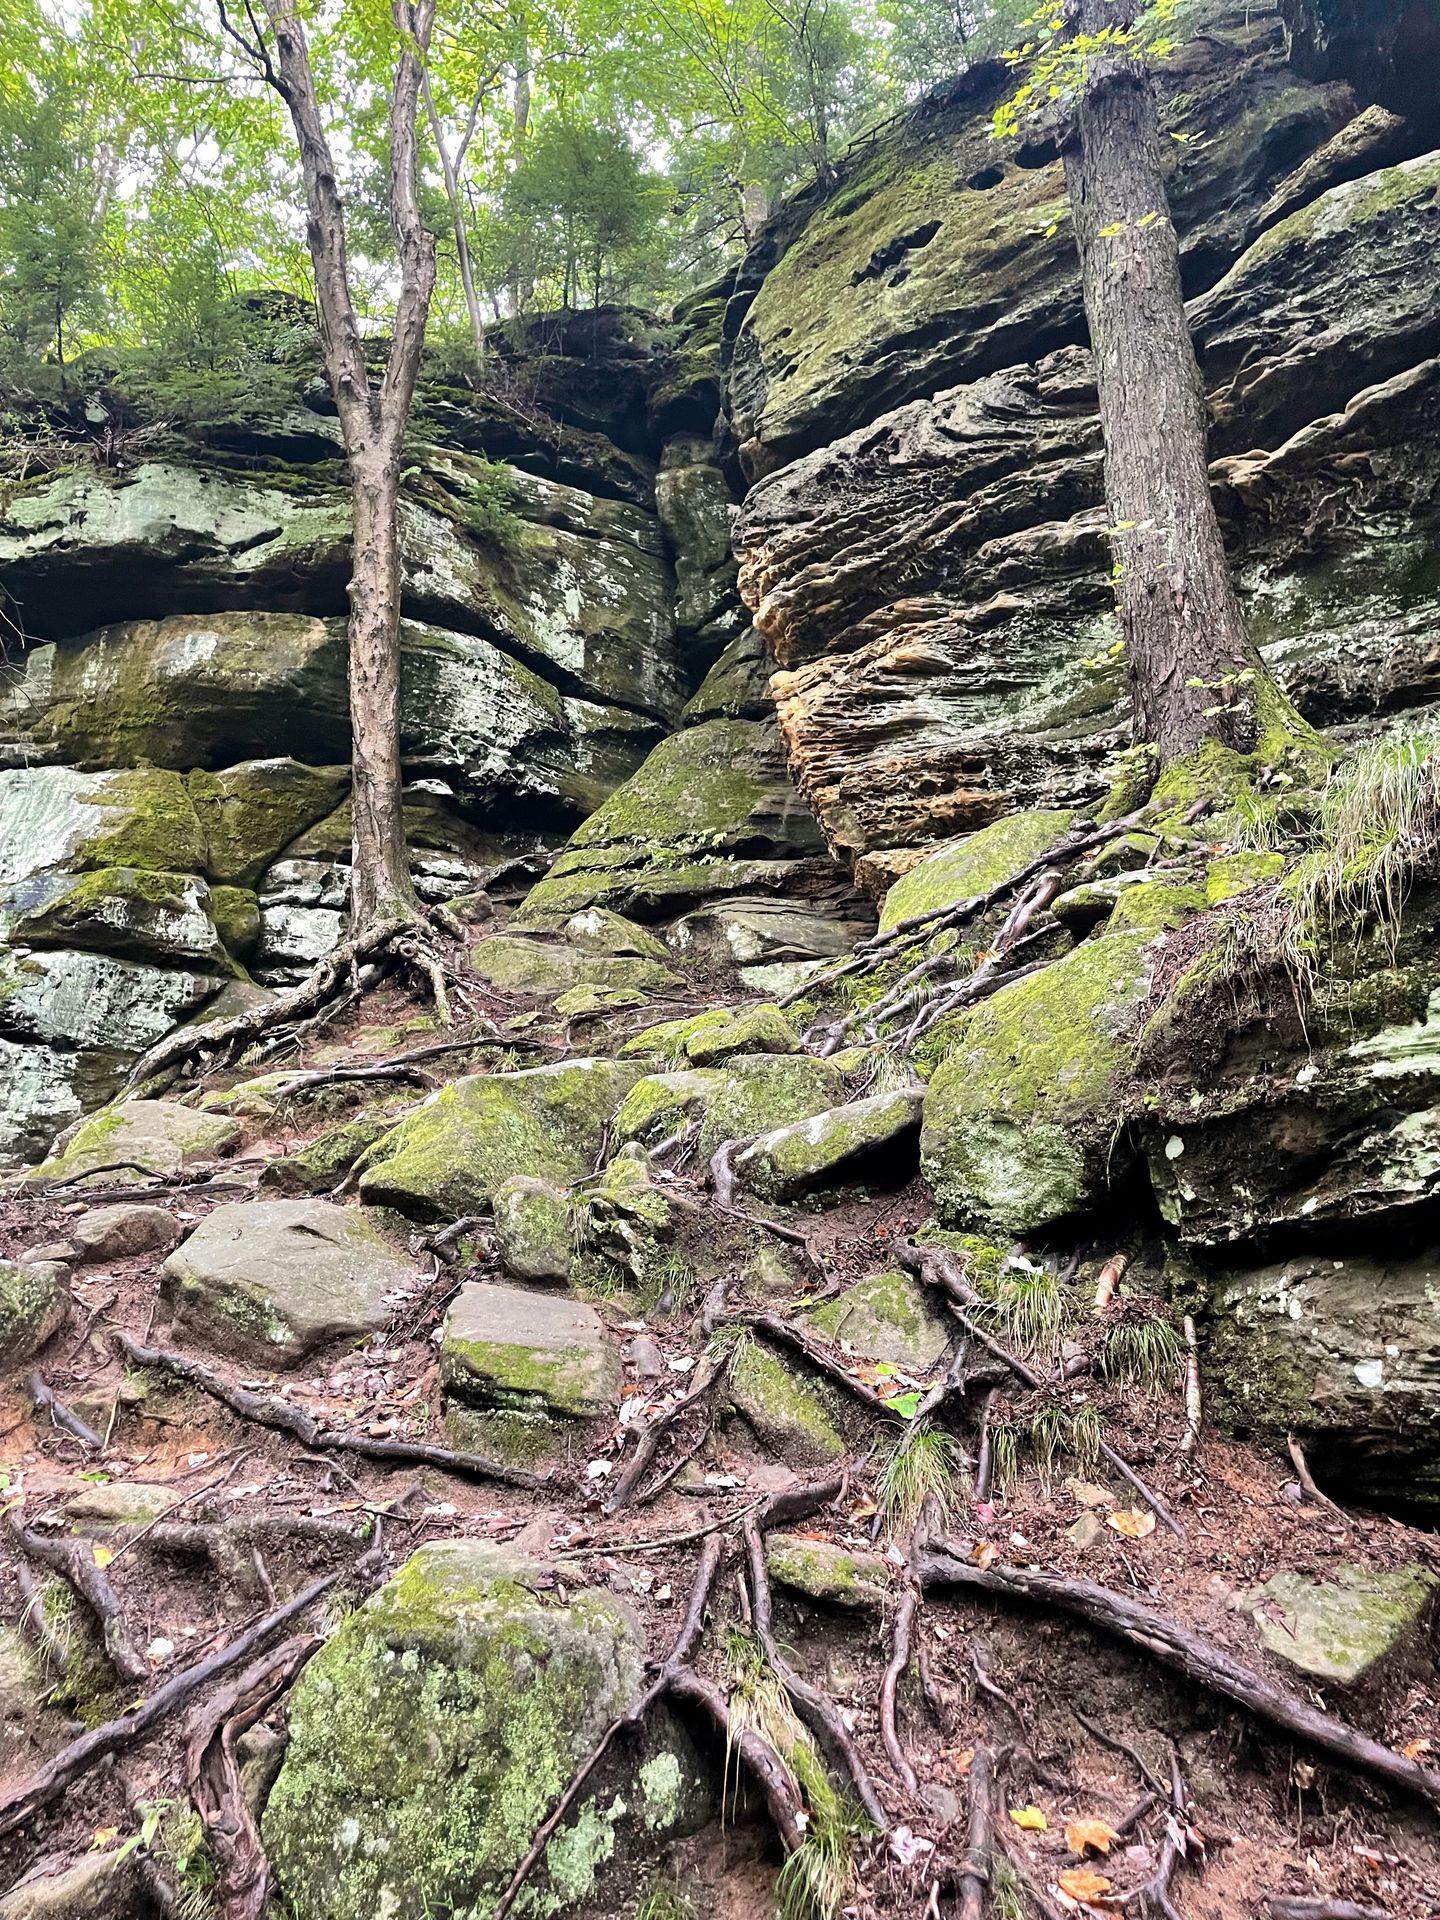 Looking up at rocky ledges with some tall trees in front of the rocks.